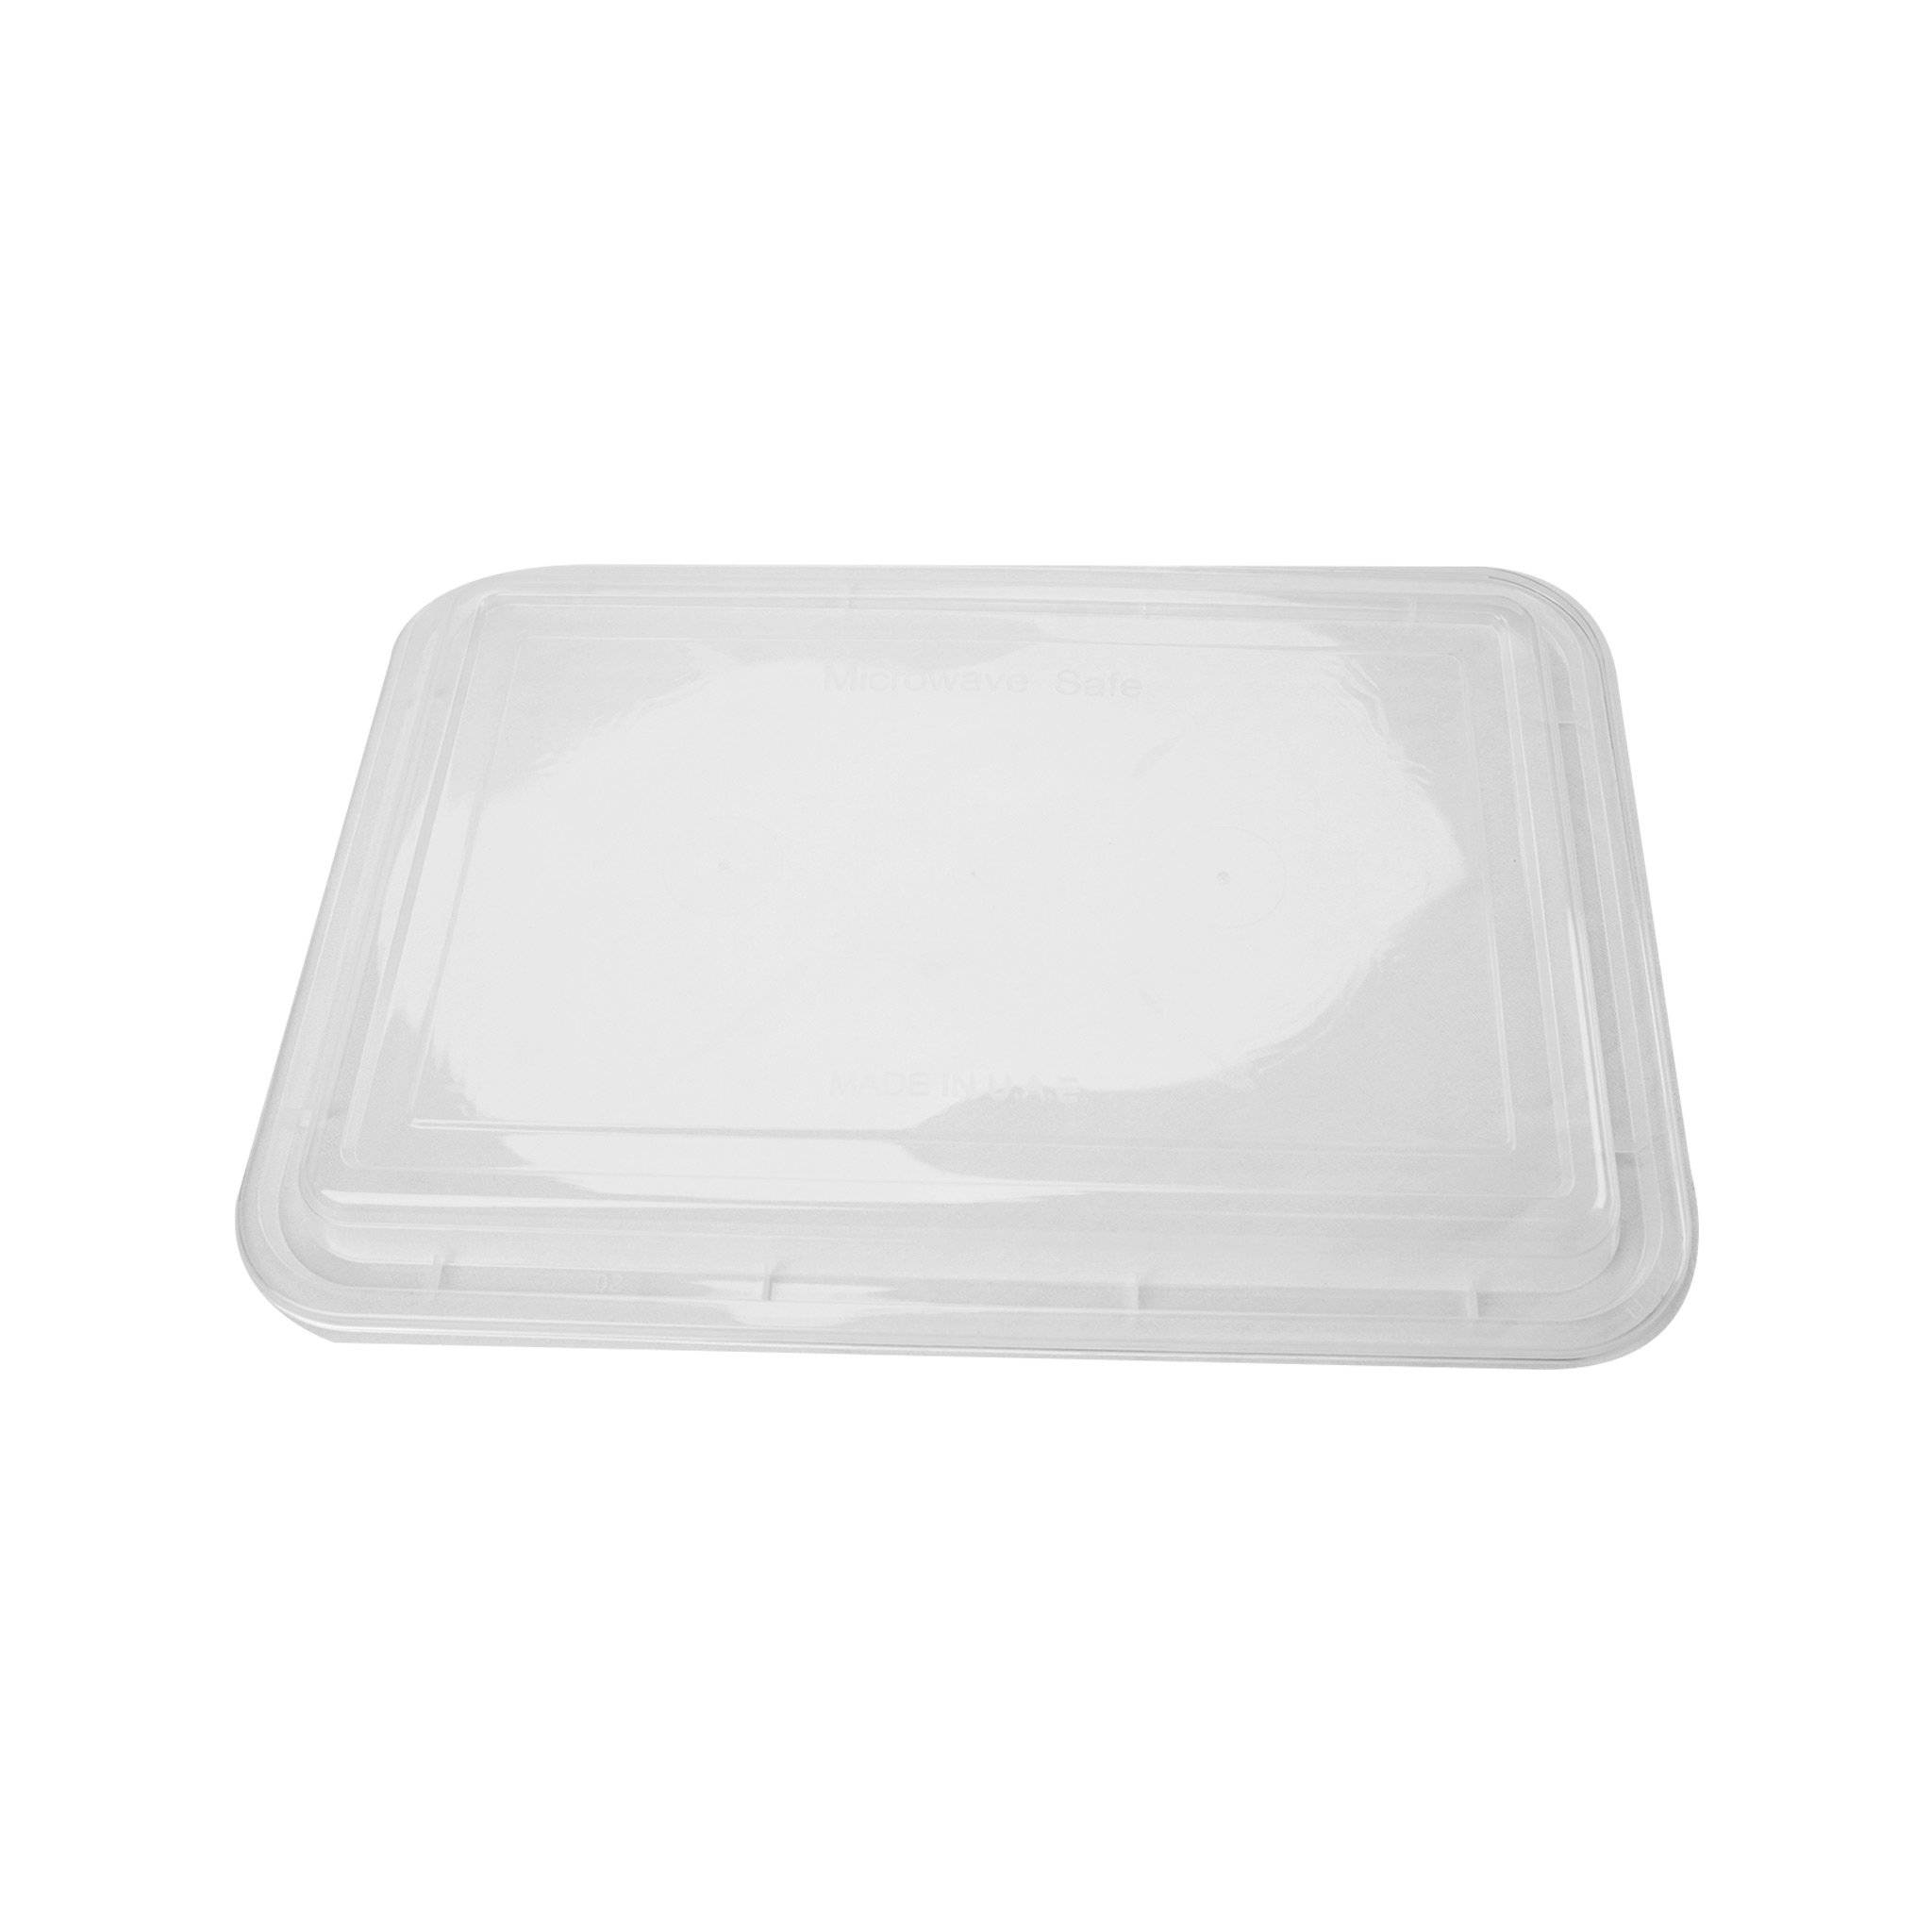 Black Base Rectangular Container 58 Oz Lids Only